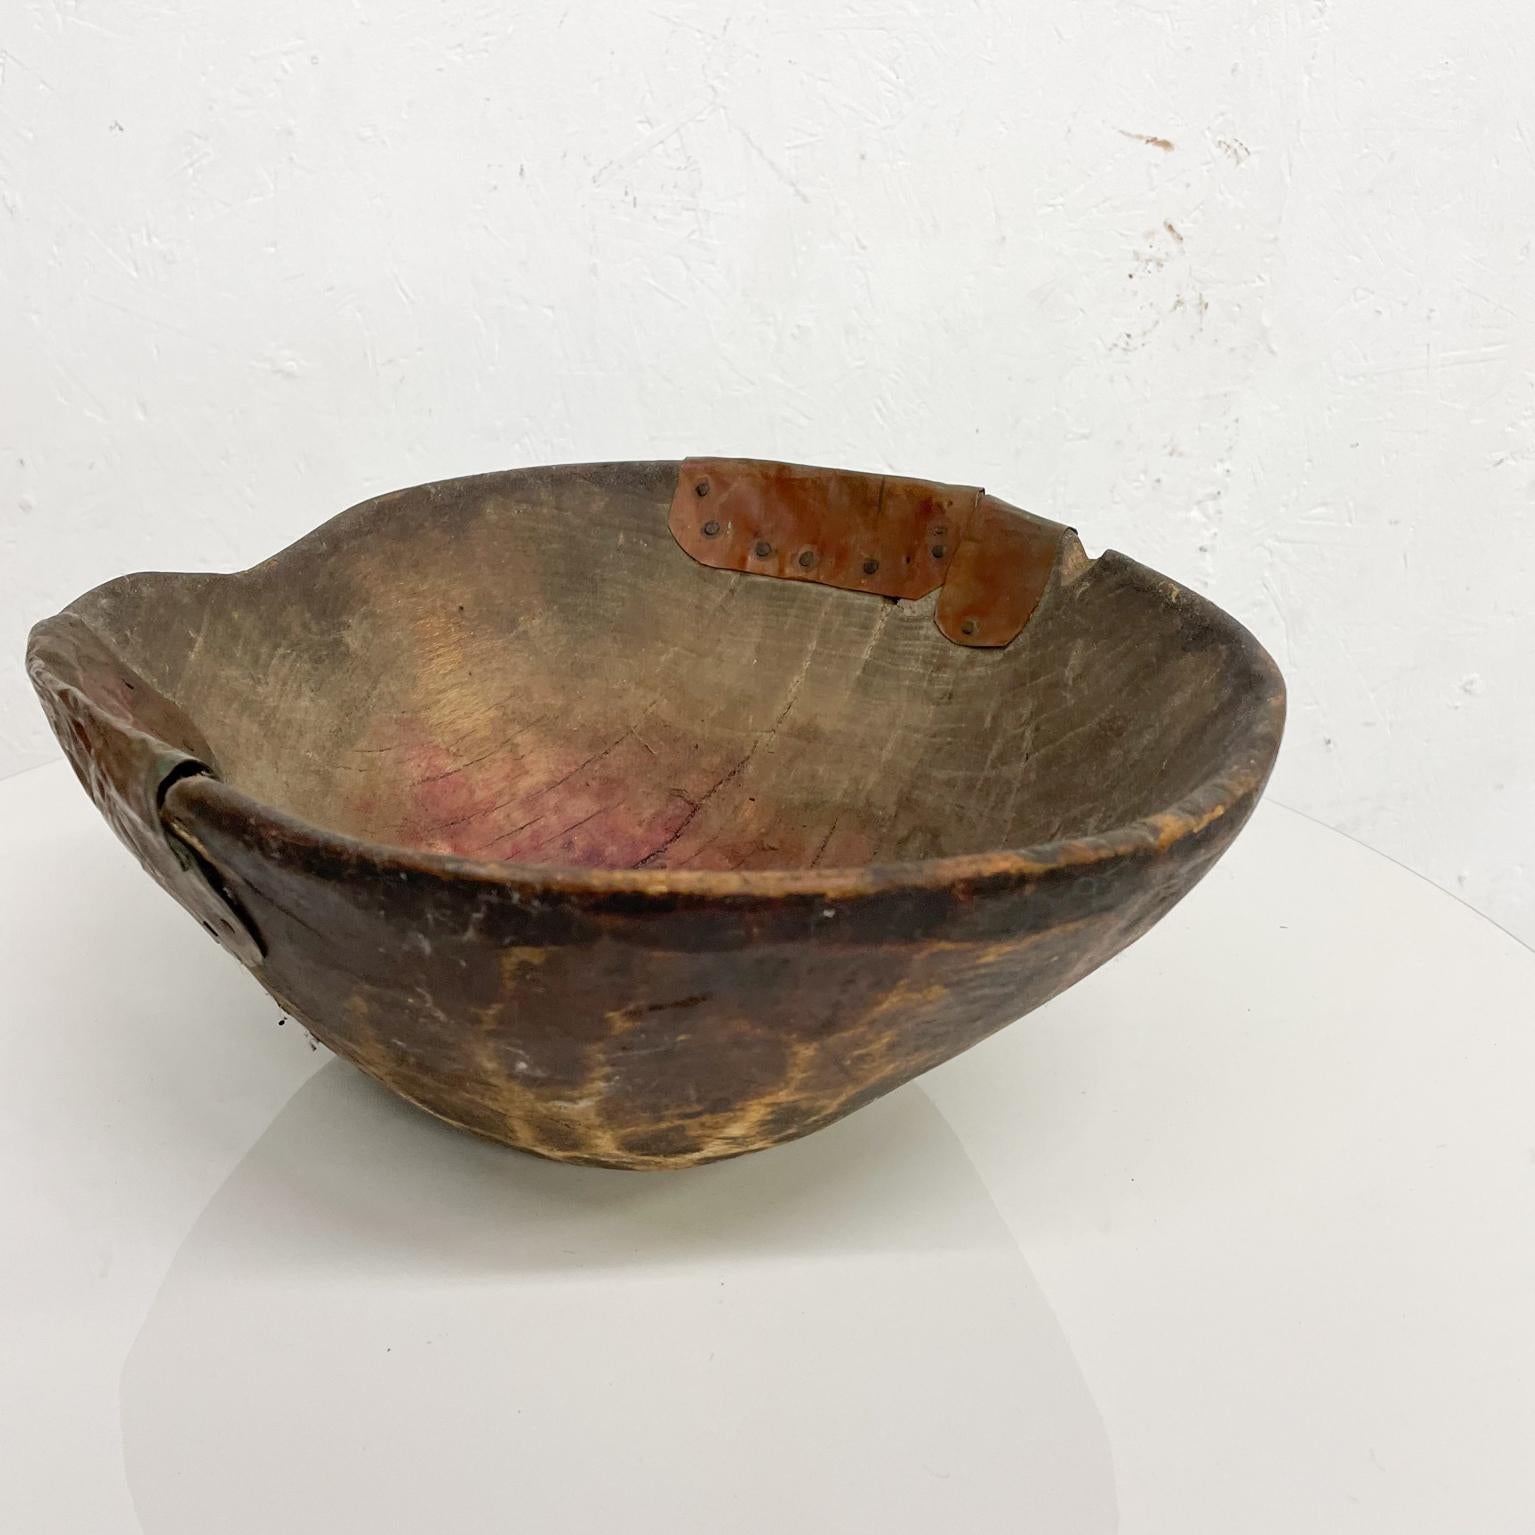 Handmade Sculptural Antique Rustic Wood Bowl with Decorative Copper 3